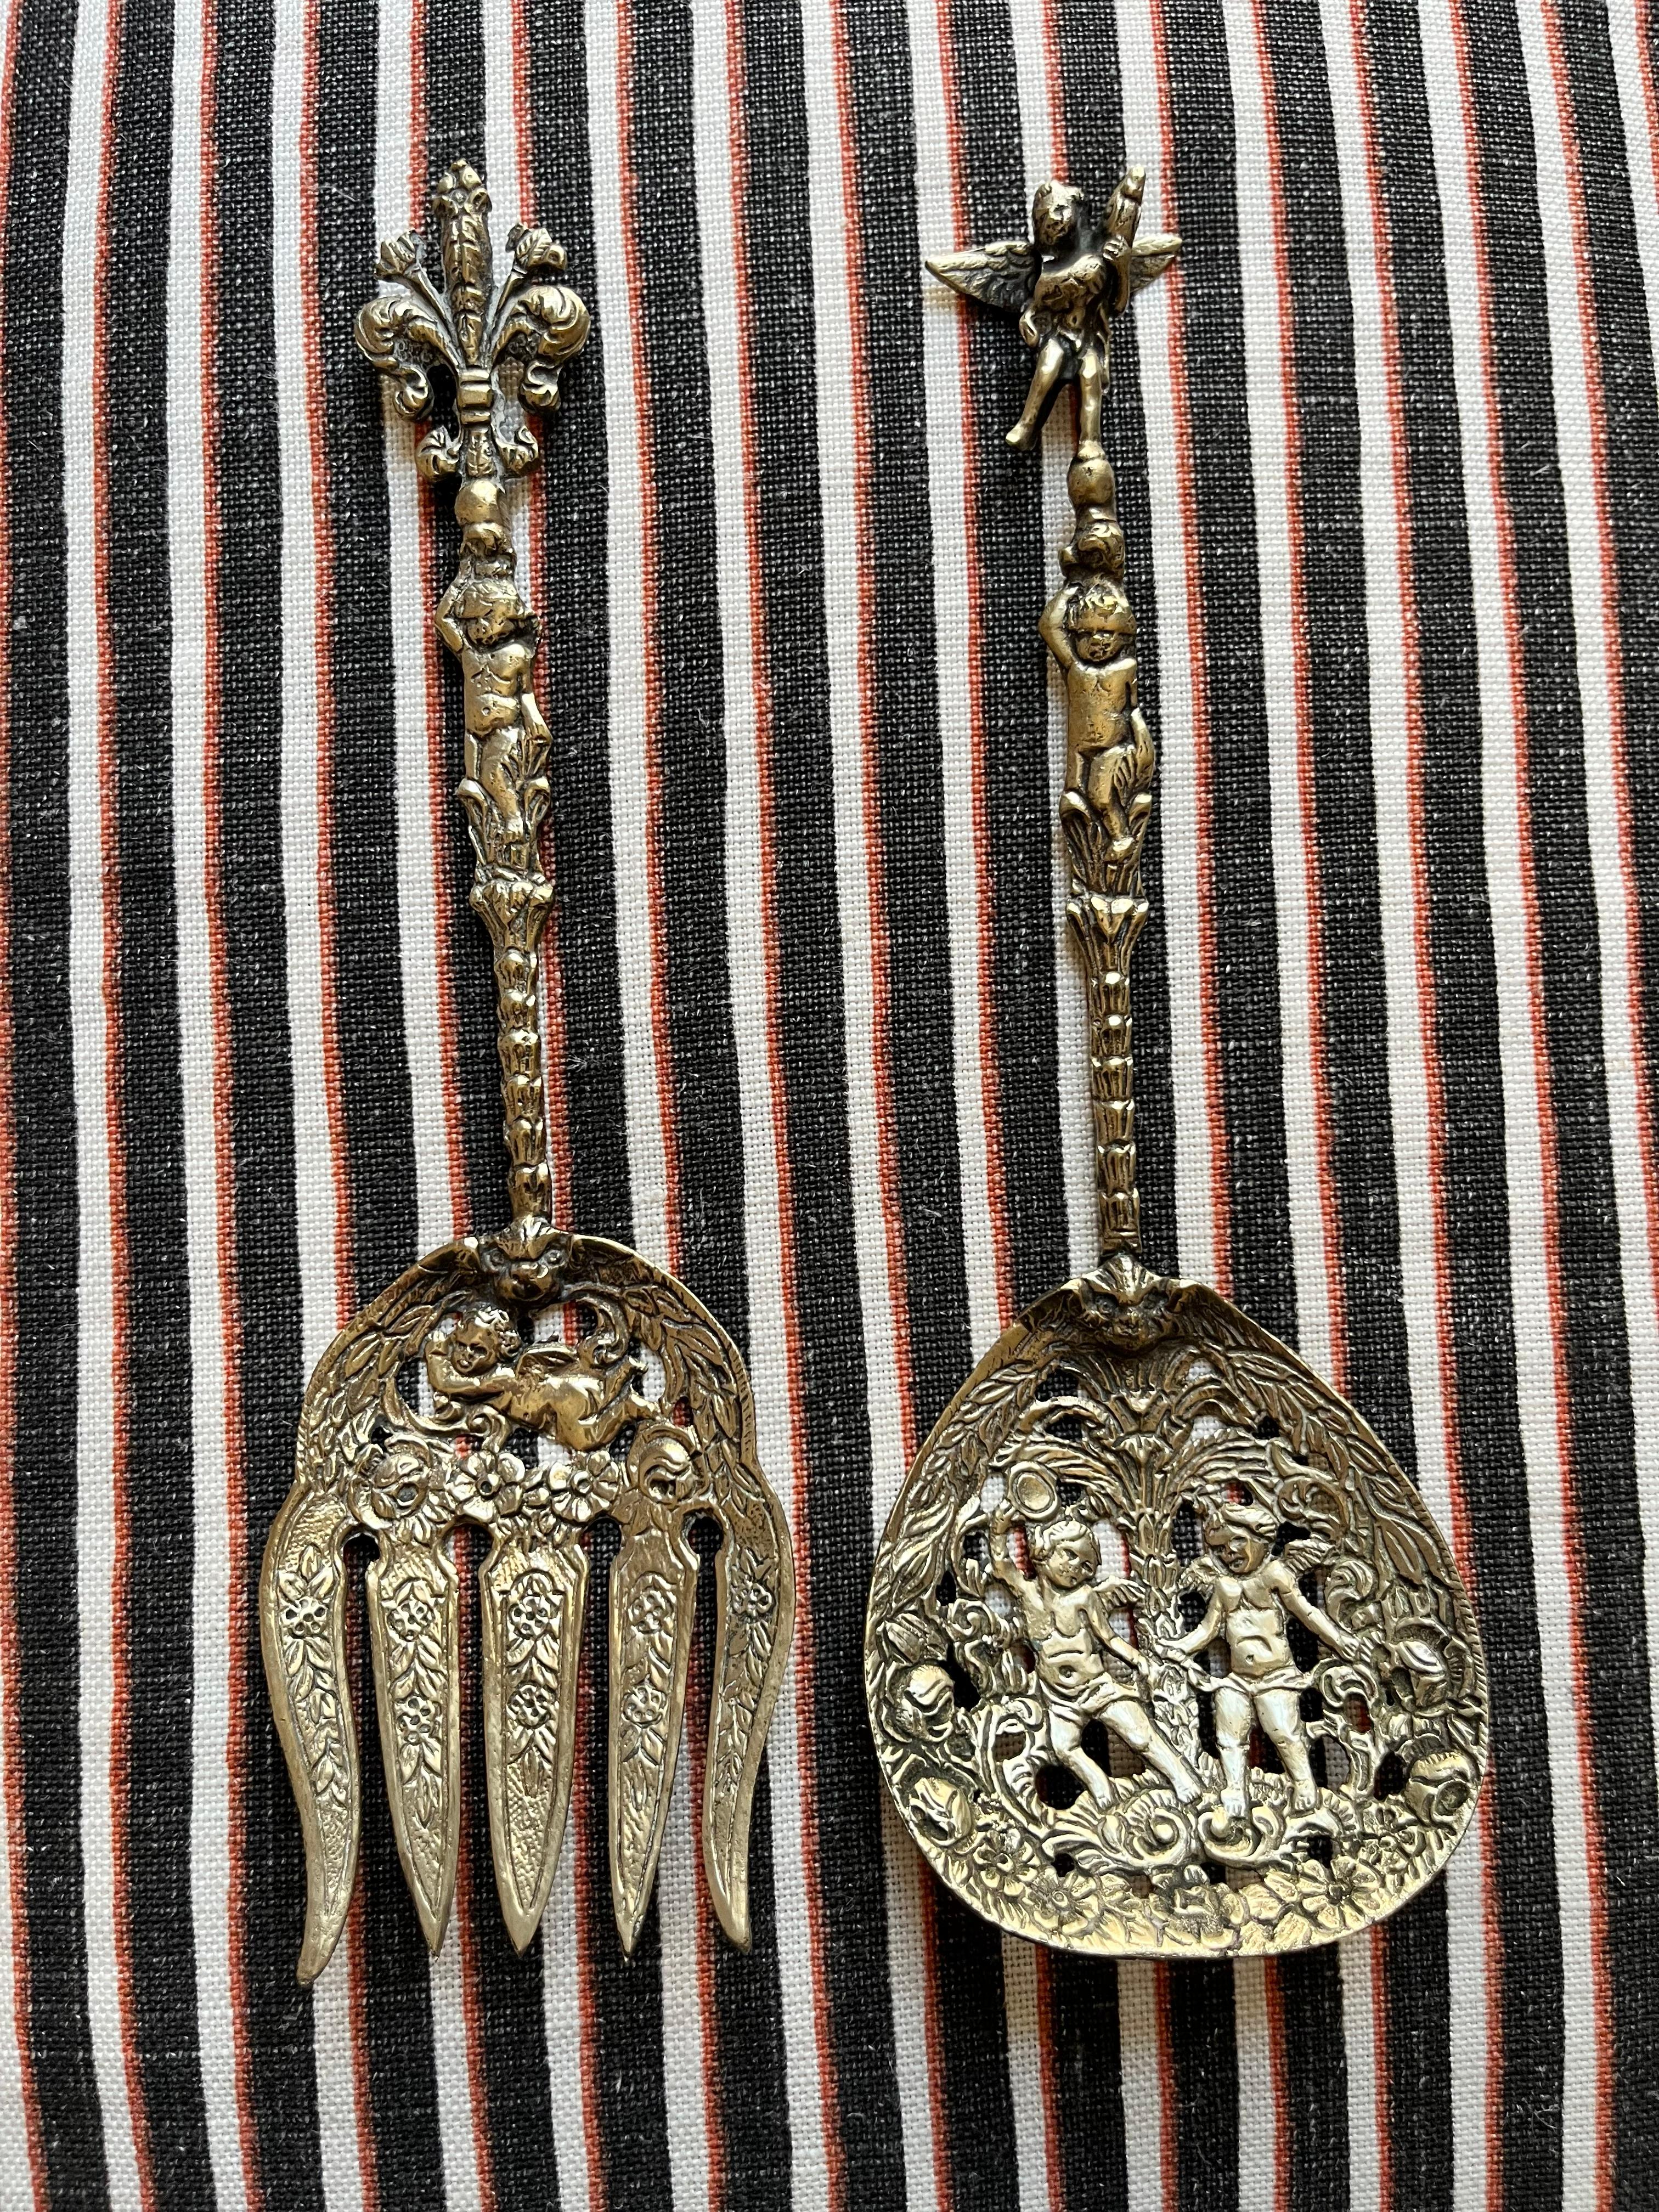 Highly decorated Italian vintage salad servers set

Lift every salad serving with this vintage Italian salad servers set. Highly decorated and extremely detailed with motifs of fat angels. Made in Italy.

Height: 23 cm (9.1 in).